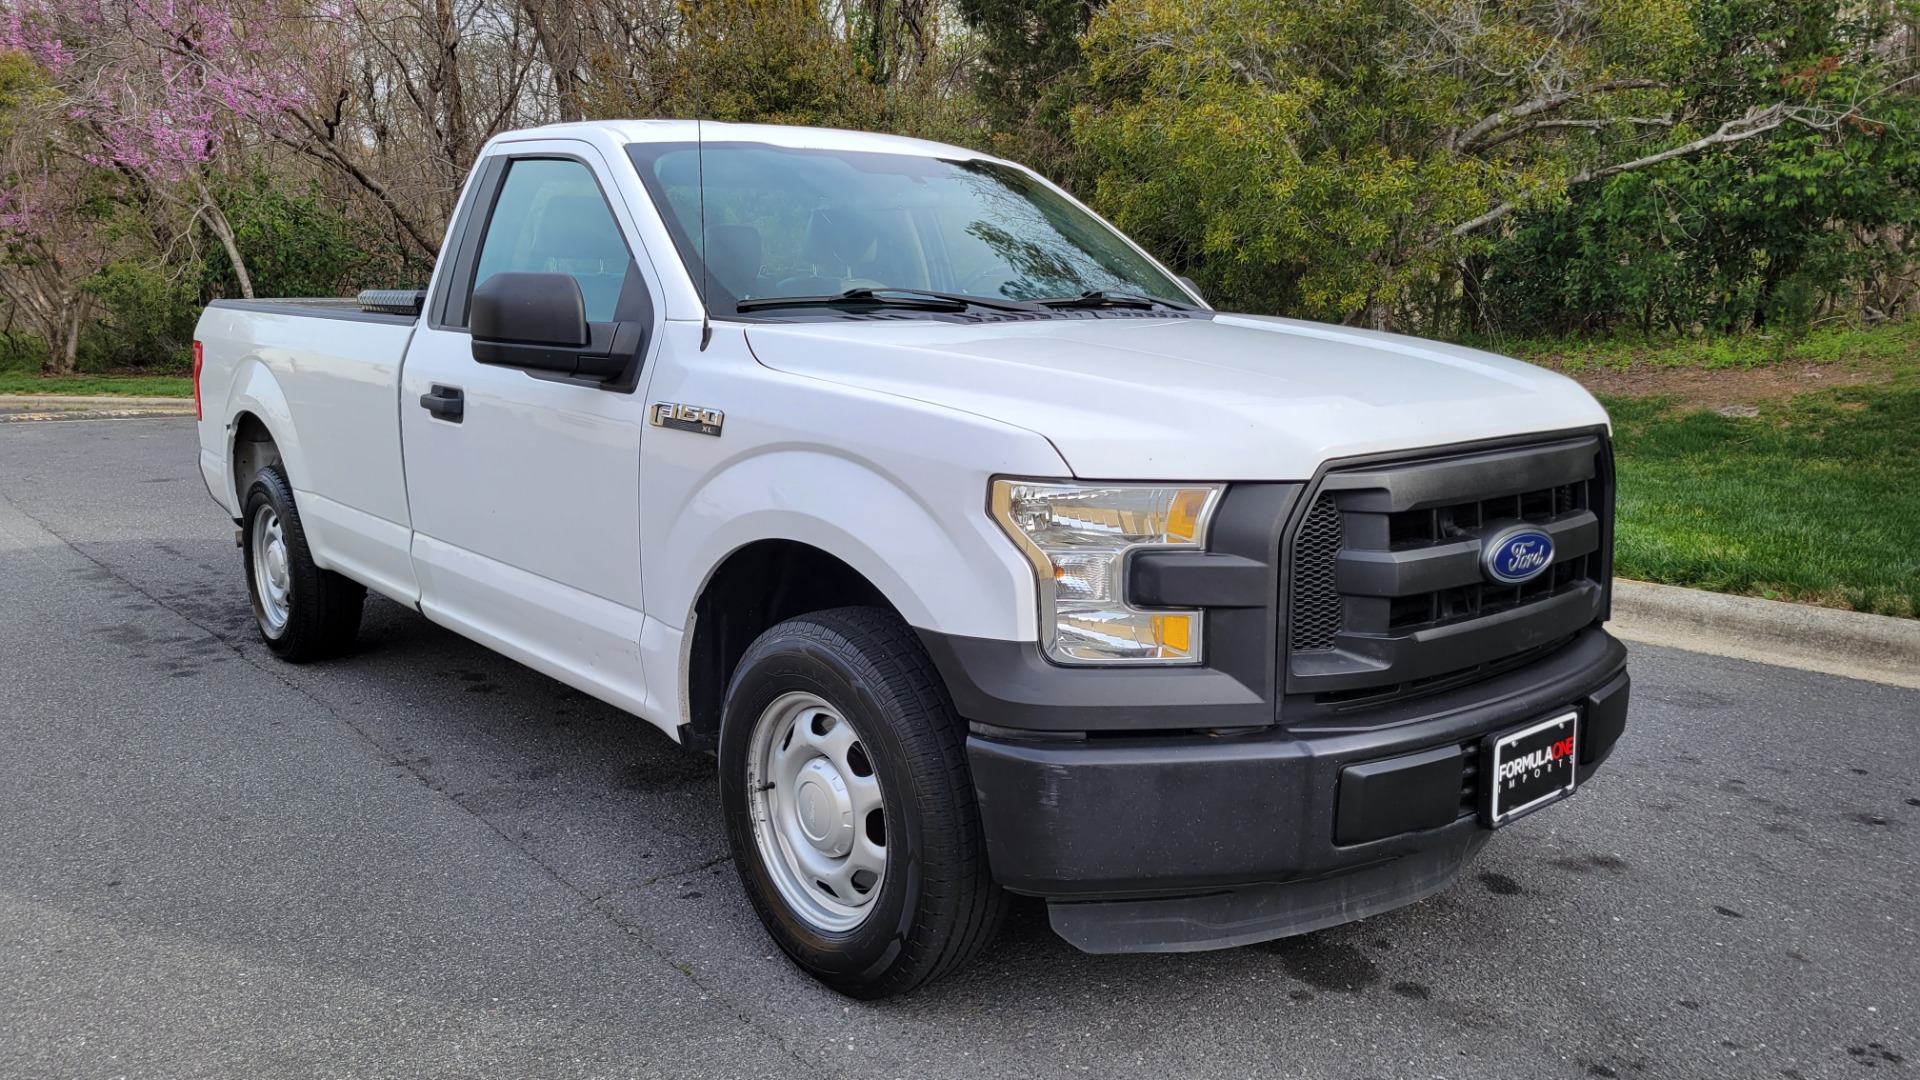 Used 2016 Ford F-150 XL REGULAR CAB 4X2 / 3.5L V6 / 6-SPD AUTO / TOWING / TOOL BOX for sale Sold at Formula Imports in Charlotte NC 28227 4